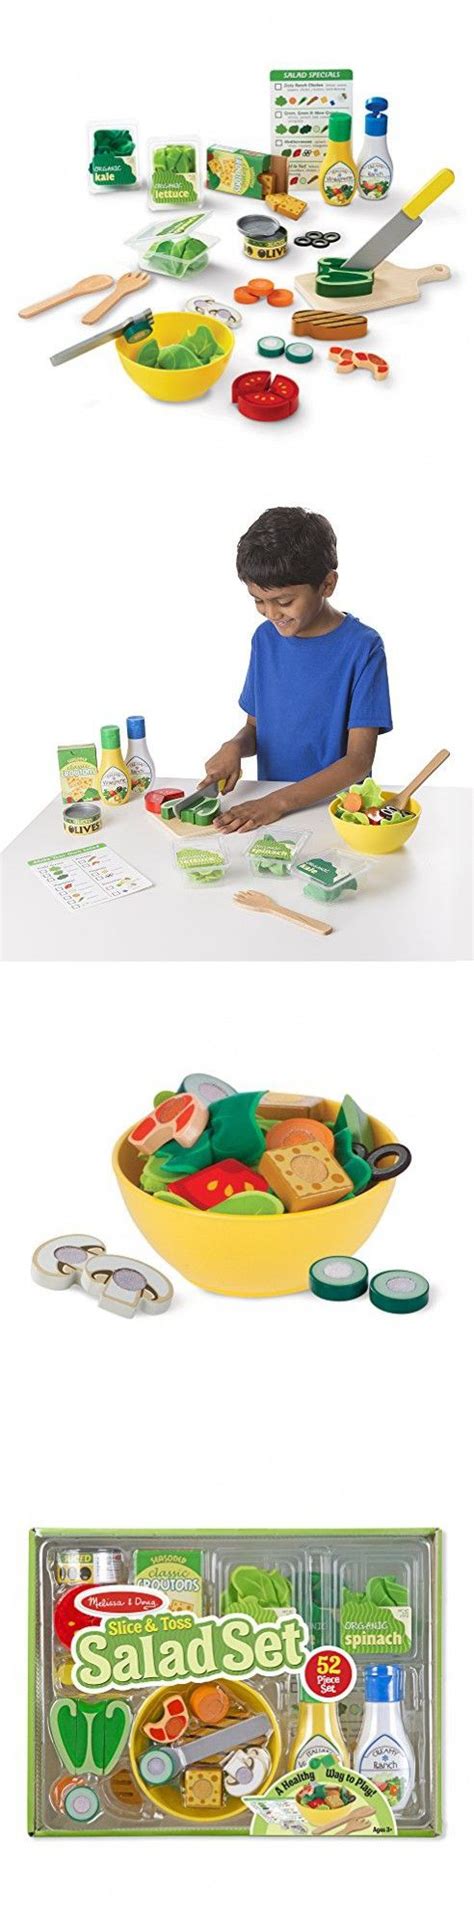 Melissa And Doug Slice And Toss Salad Play Food Set With 52 Wooden And Felt